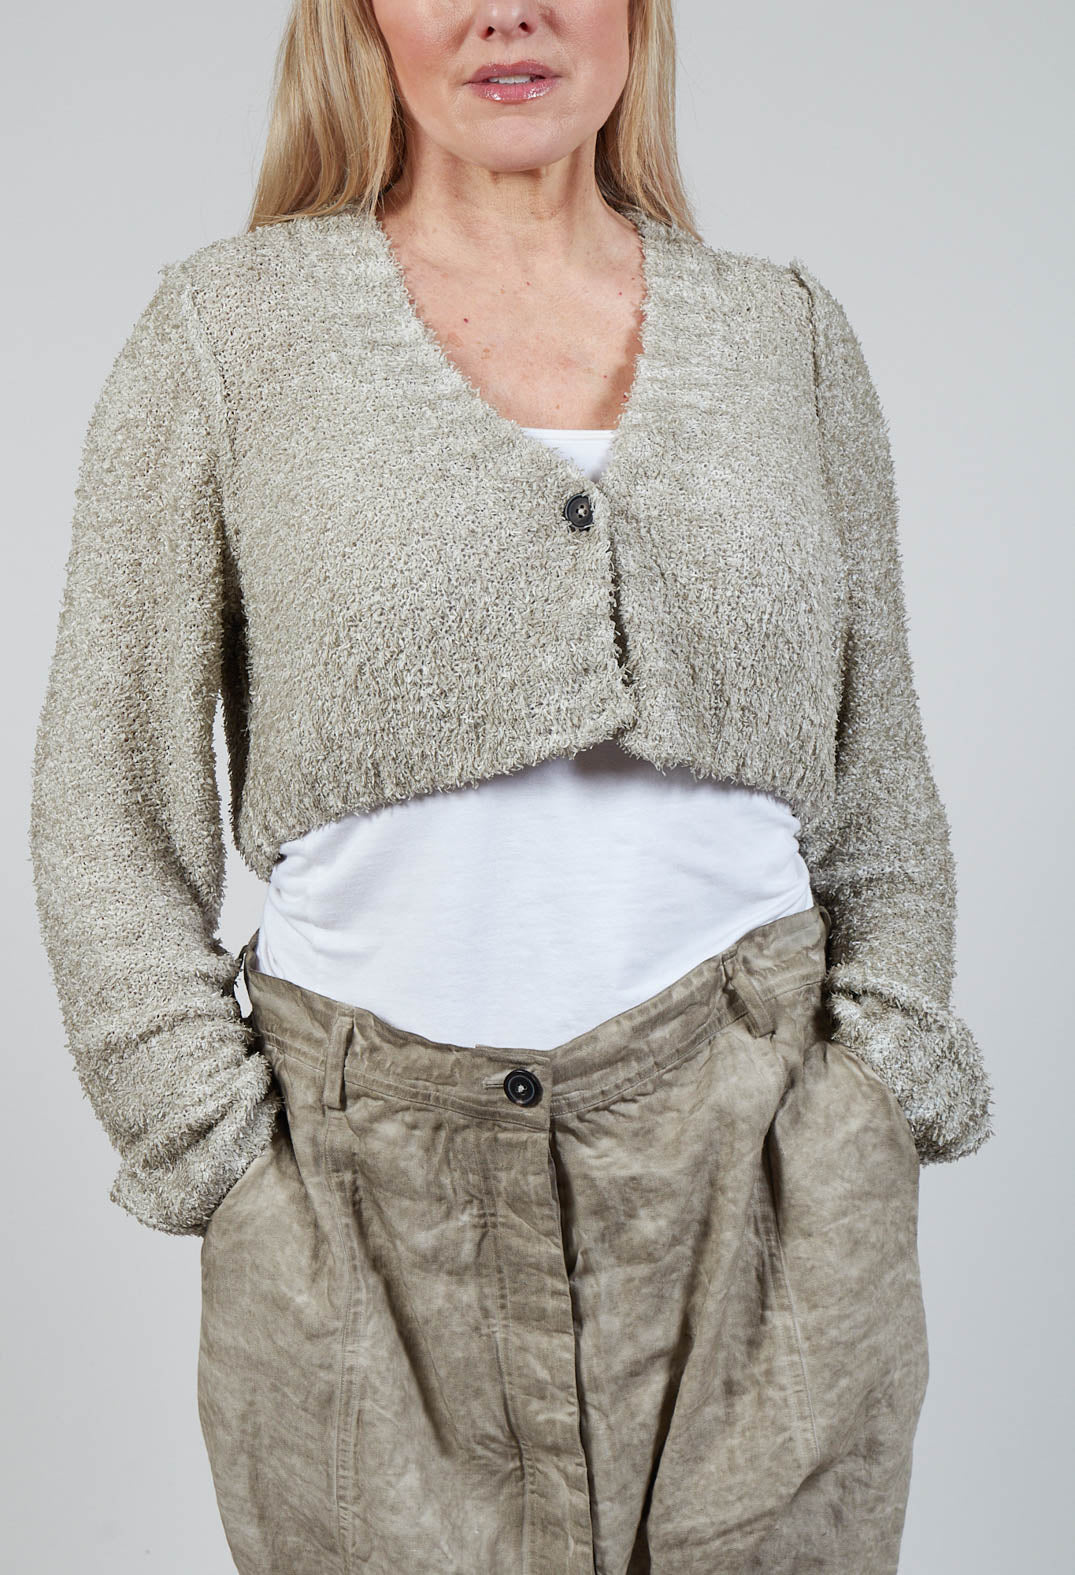 Cropped Cardigan in Straw Cloud